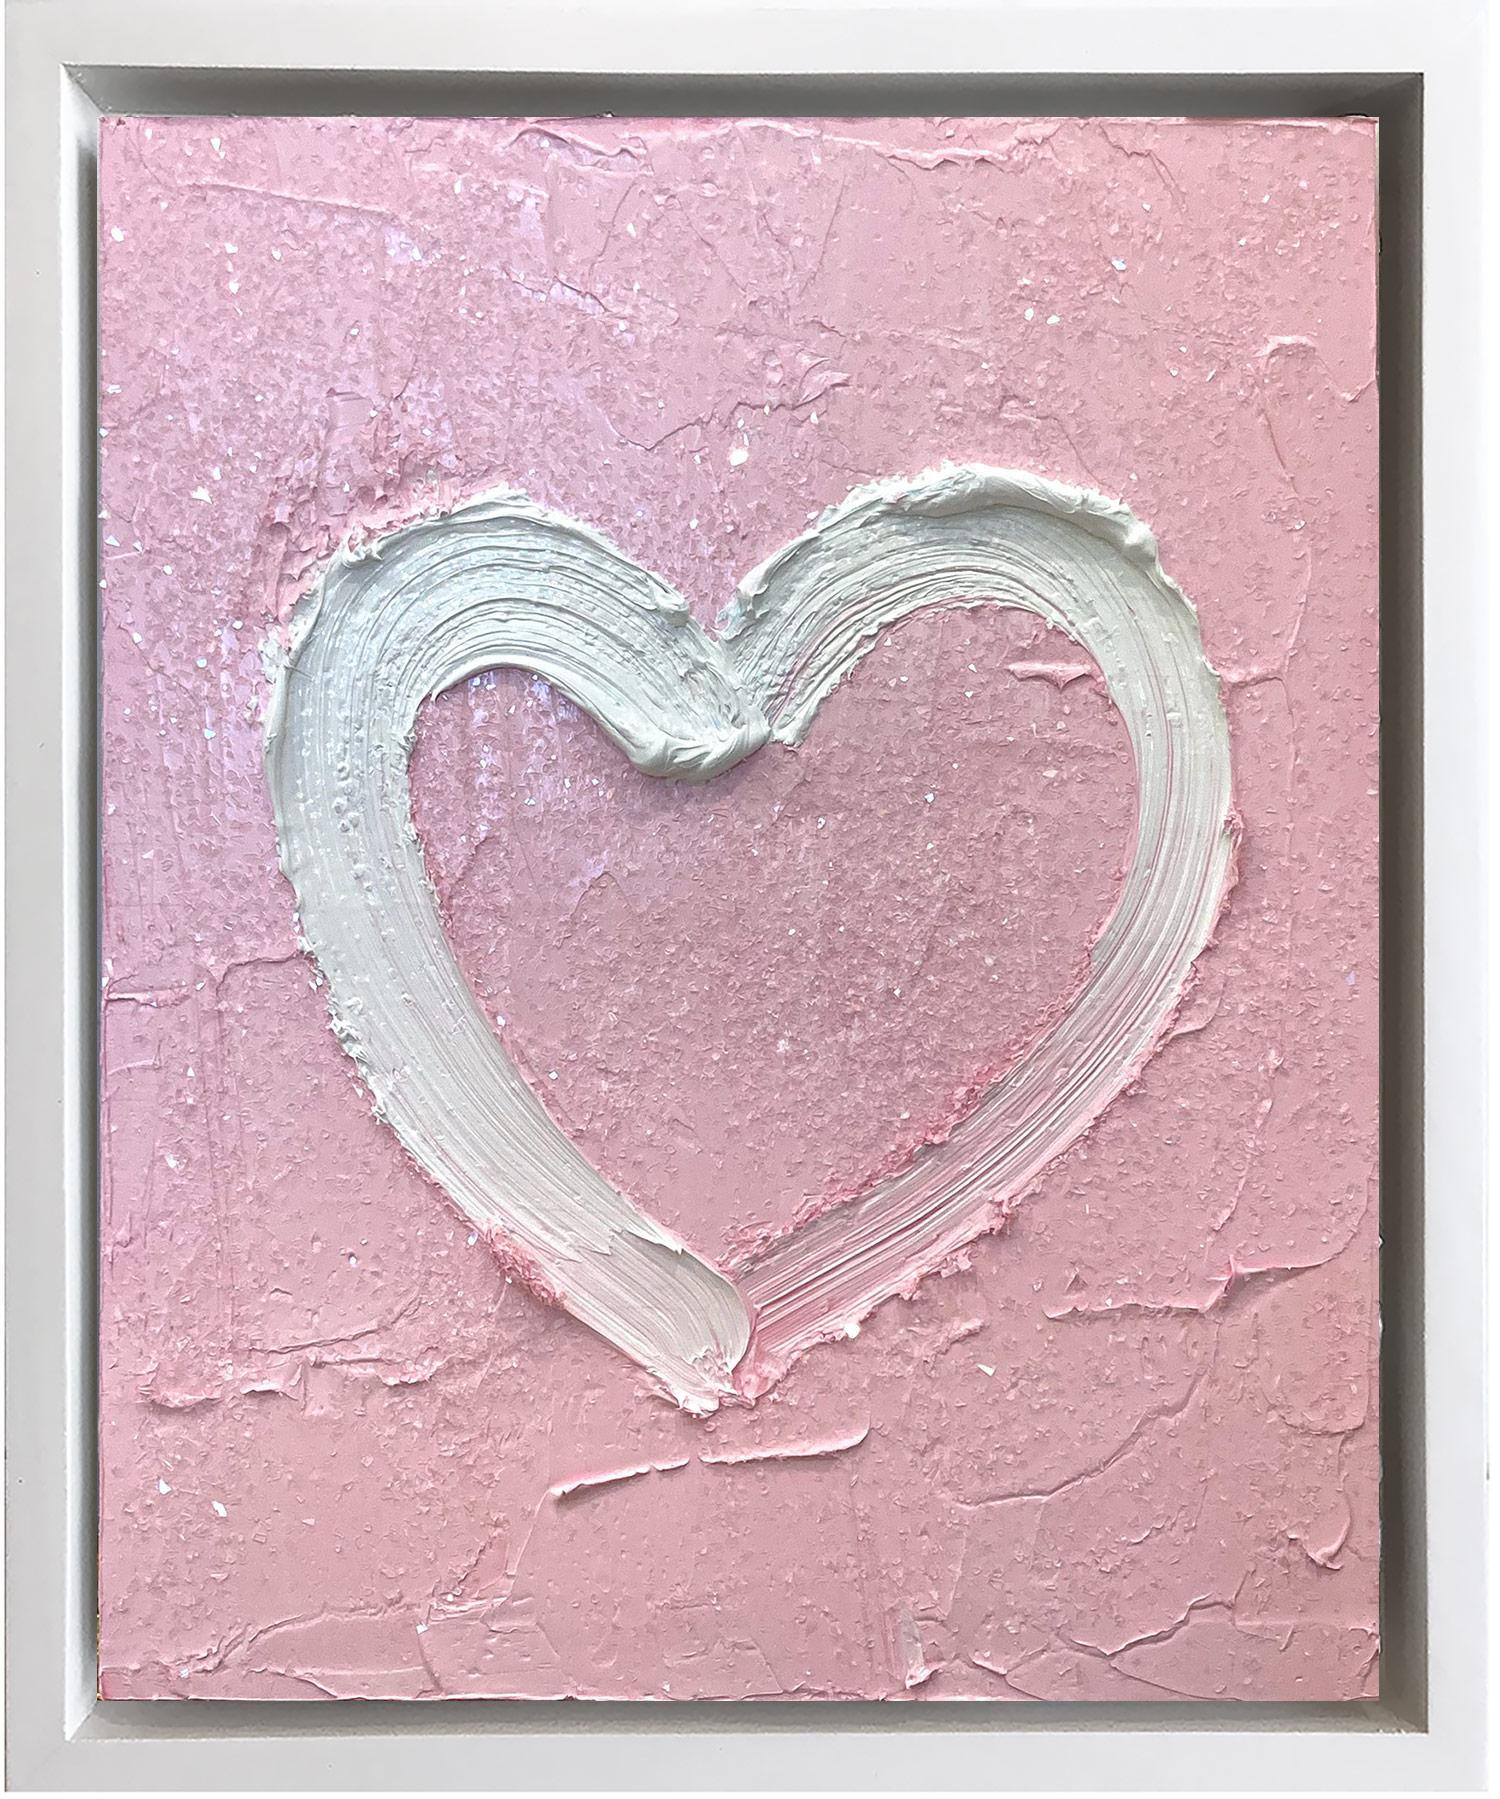 Cindy Shaoul Abstract Painting - "My Pink Diamond Heart" Contemporary Pop Oil Painting Wood White Floater Frame